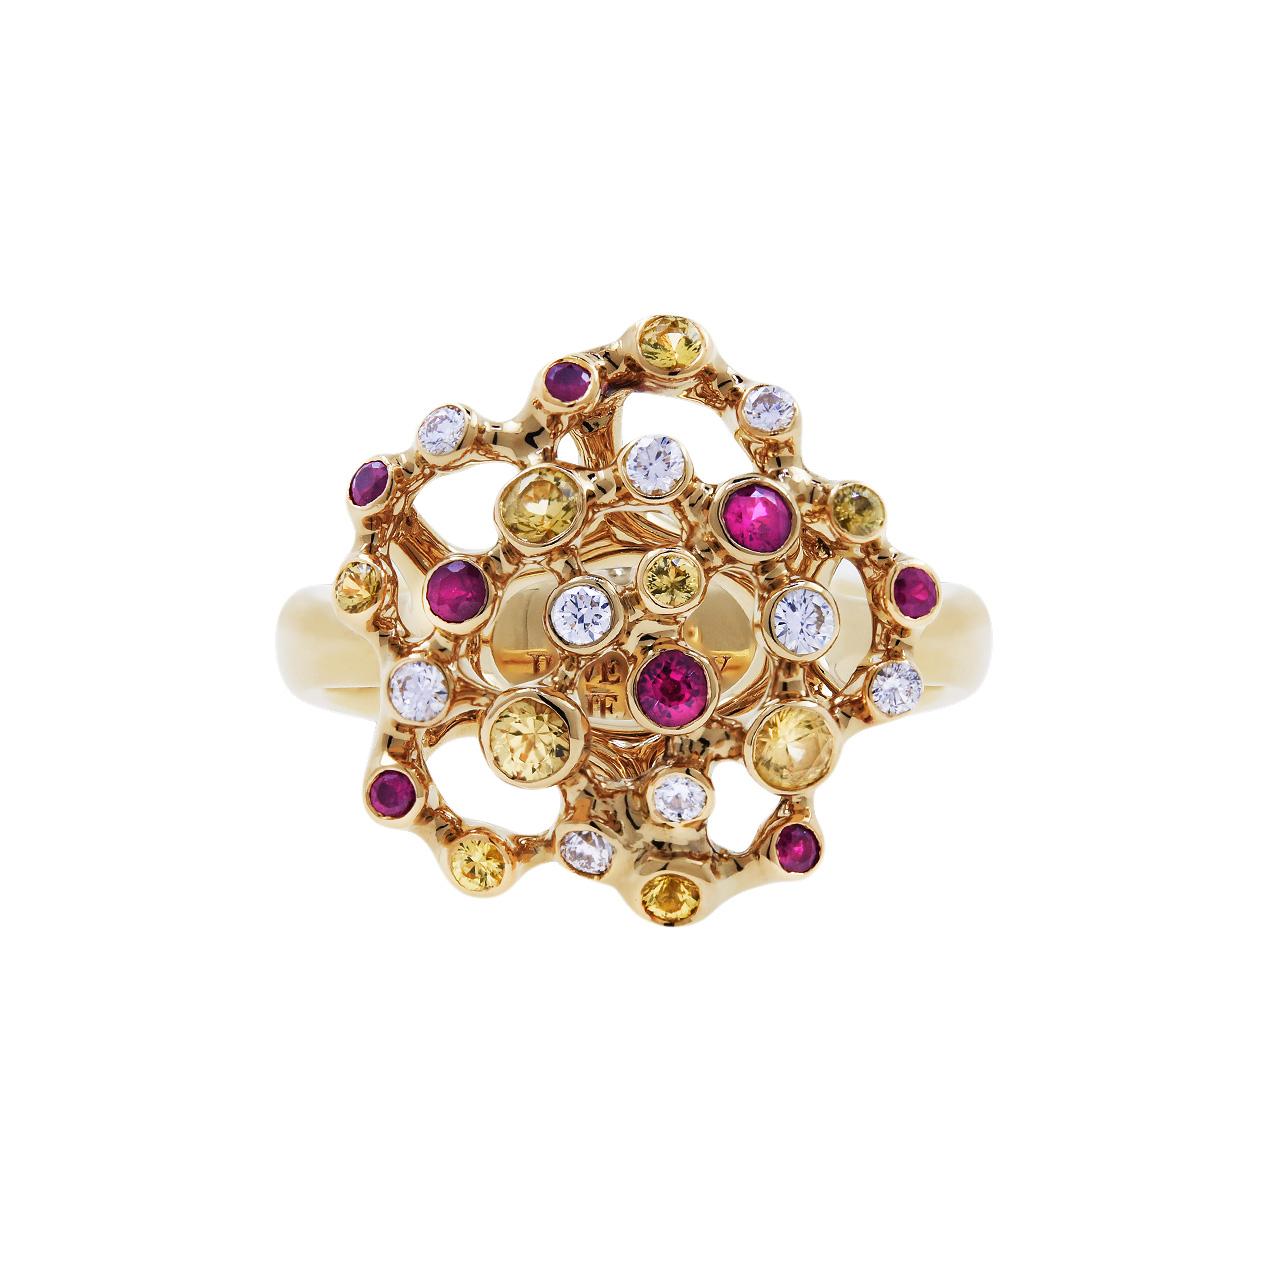 - 10 Round Diamonds - 0.13 ct, D-G/VVS
- 9 Round Yellow Sapphires - 0.30 ct
- 8 Round Rubies - 0.19 ct
- 18K Yellow Gold 
- Weight: 8.98 g
- Size: 17.4 mm
This elegant ring from the Byzantium collection is encrusted with 0.13 ct of diamonds, 0.30 ct